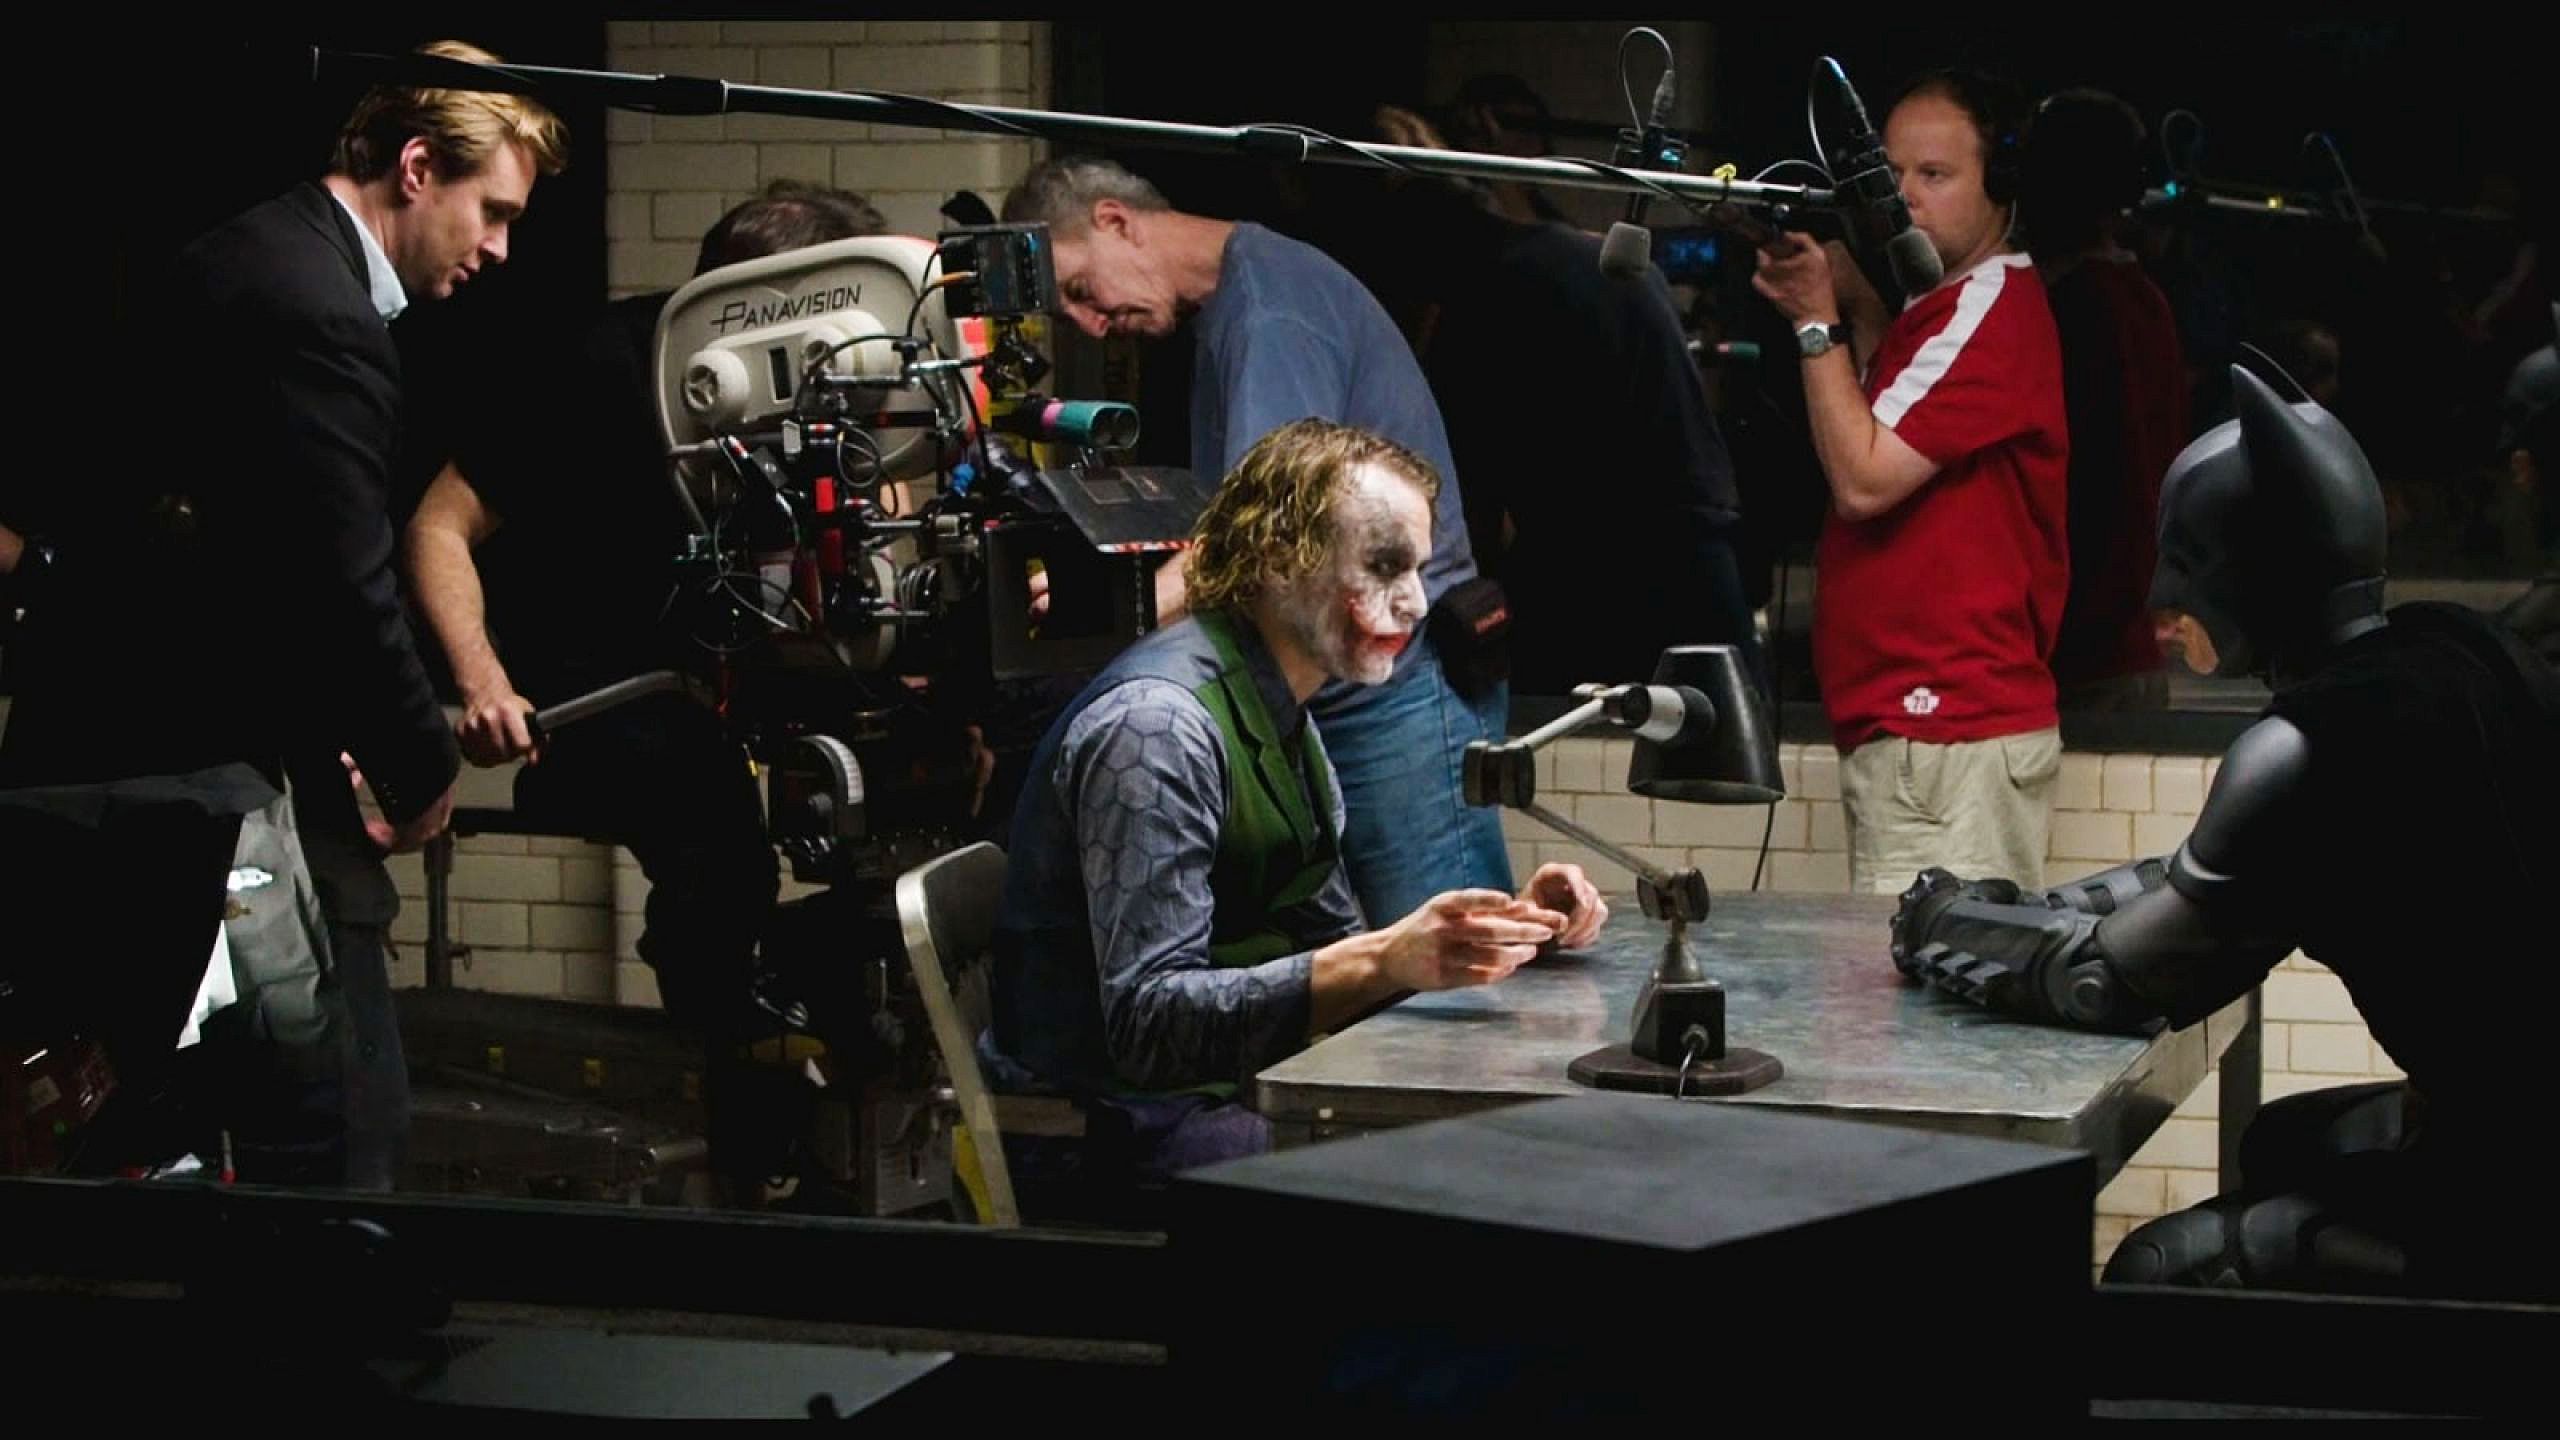 heath ledger and christian bale behind the scenes